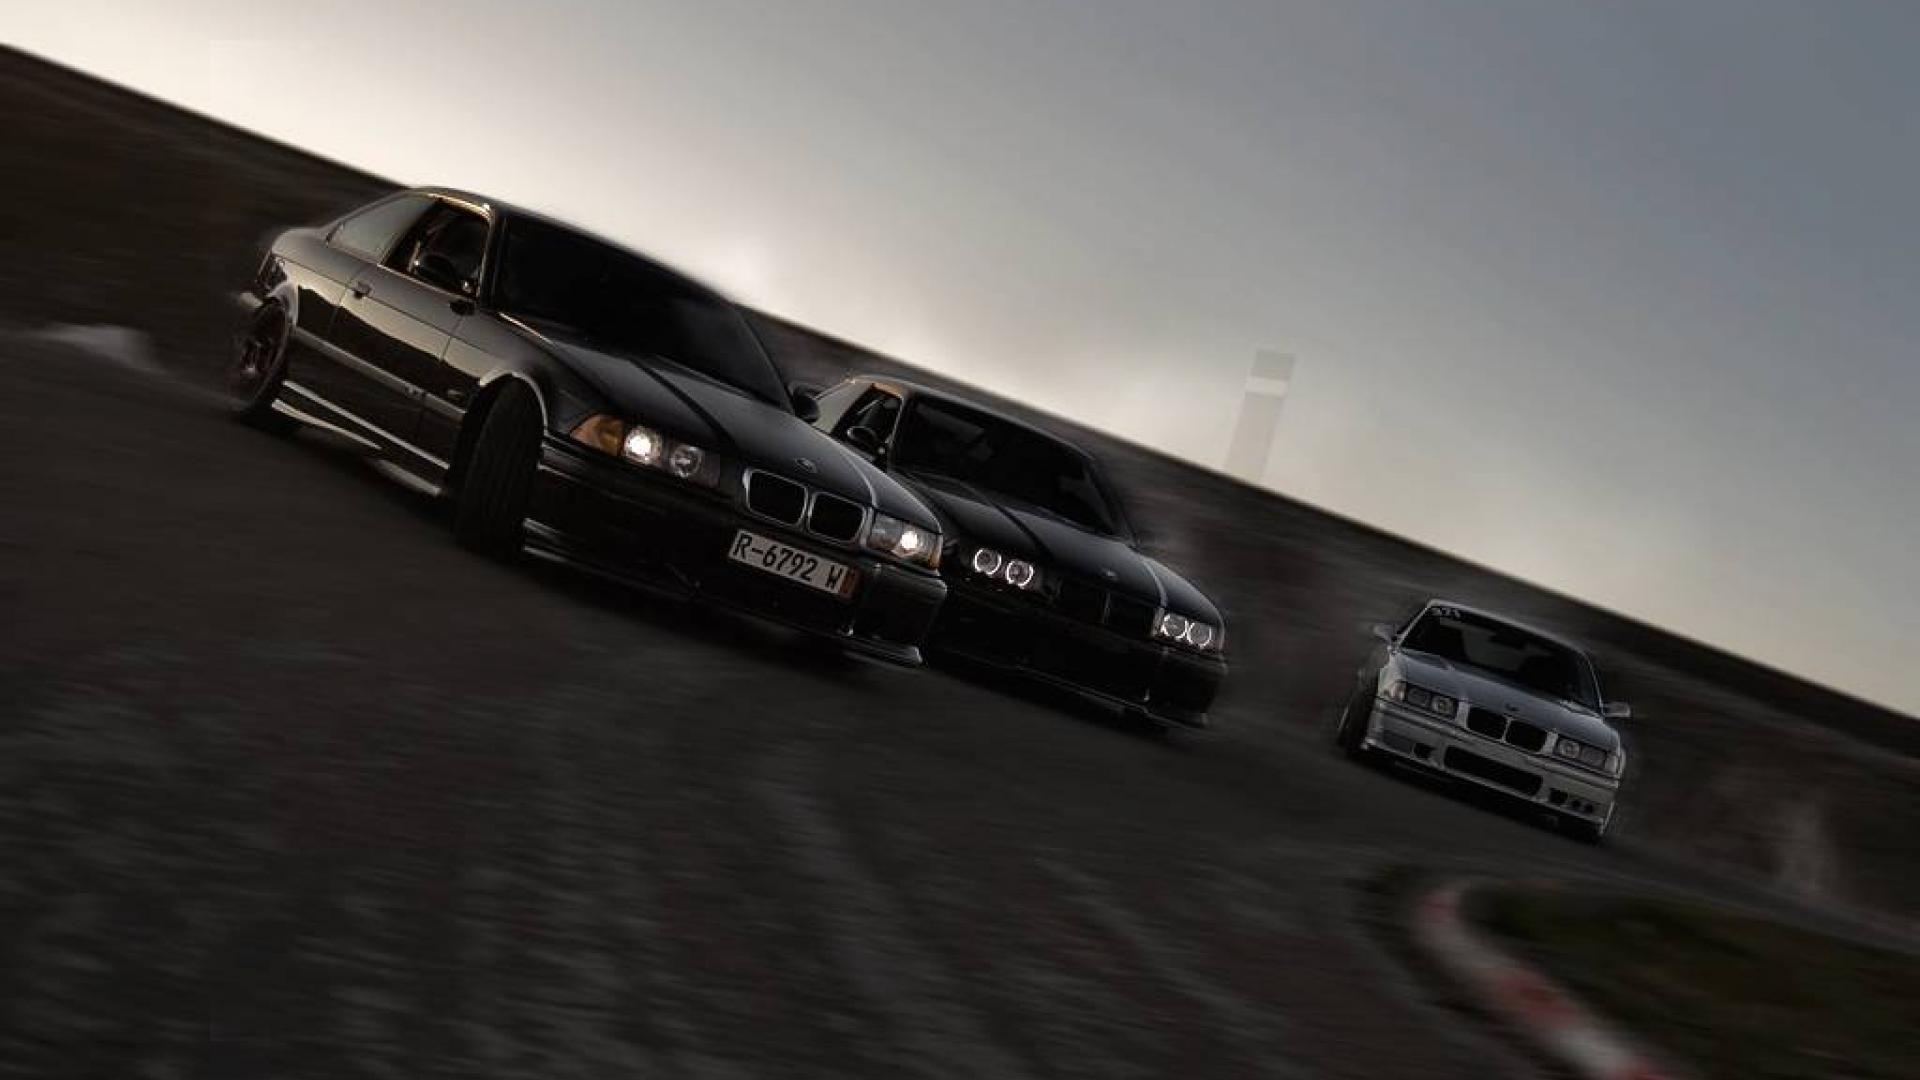 Bmw e36 drift wallpaper - Quality and Resolution